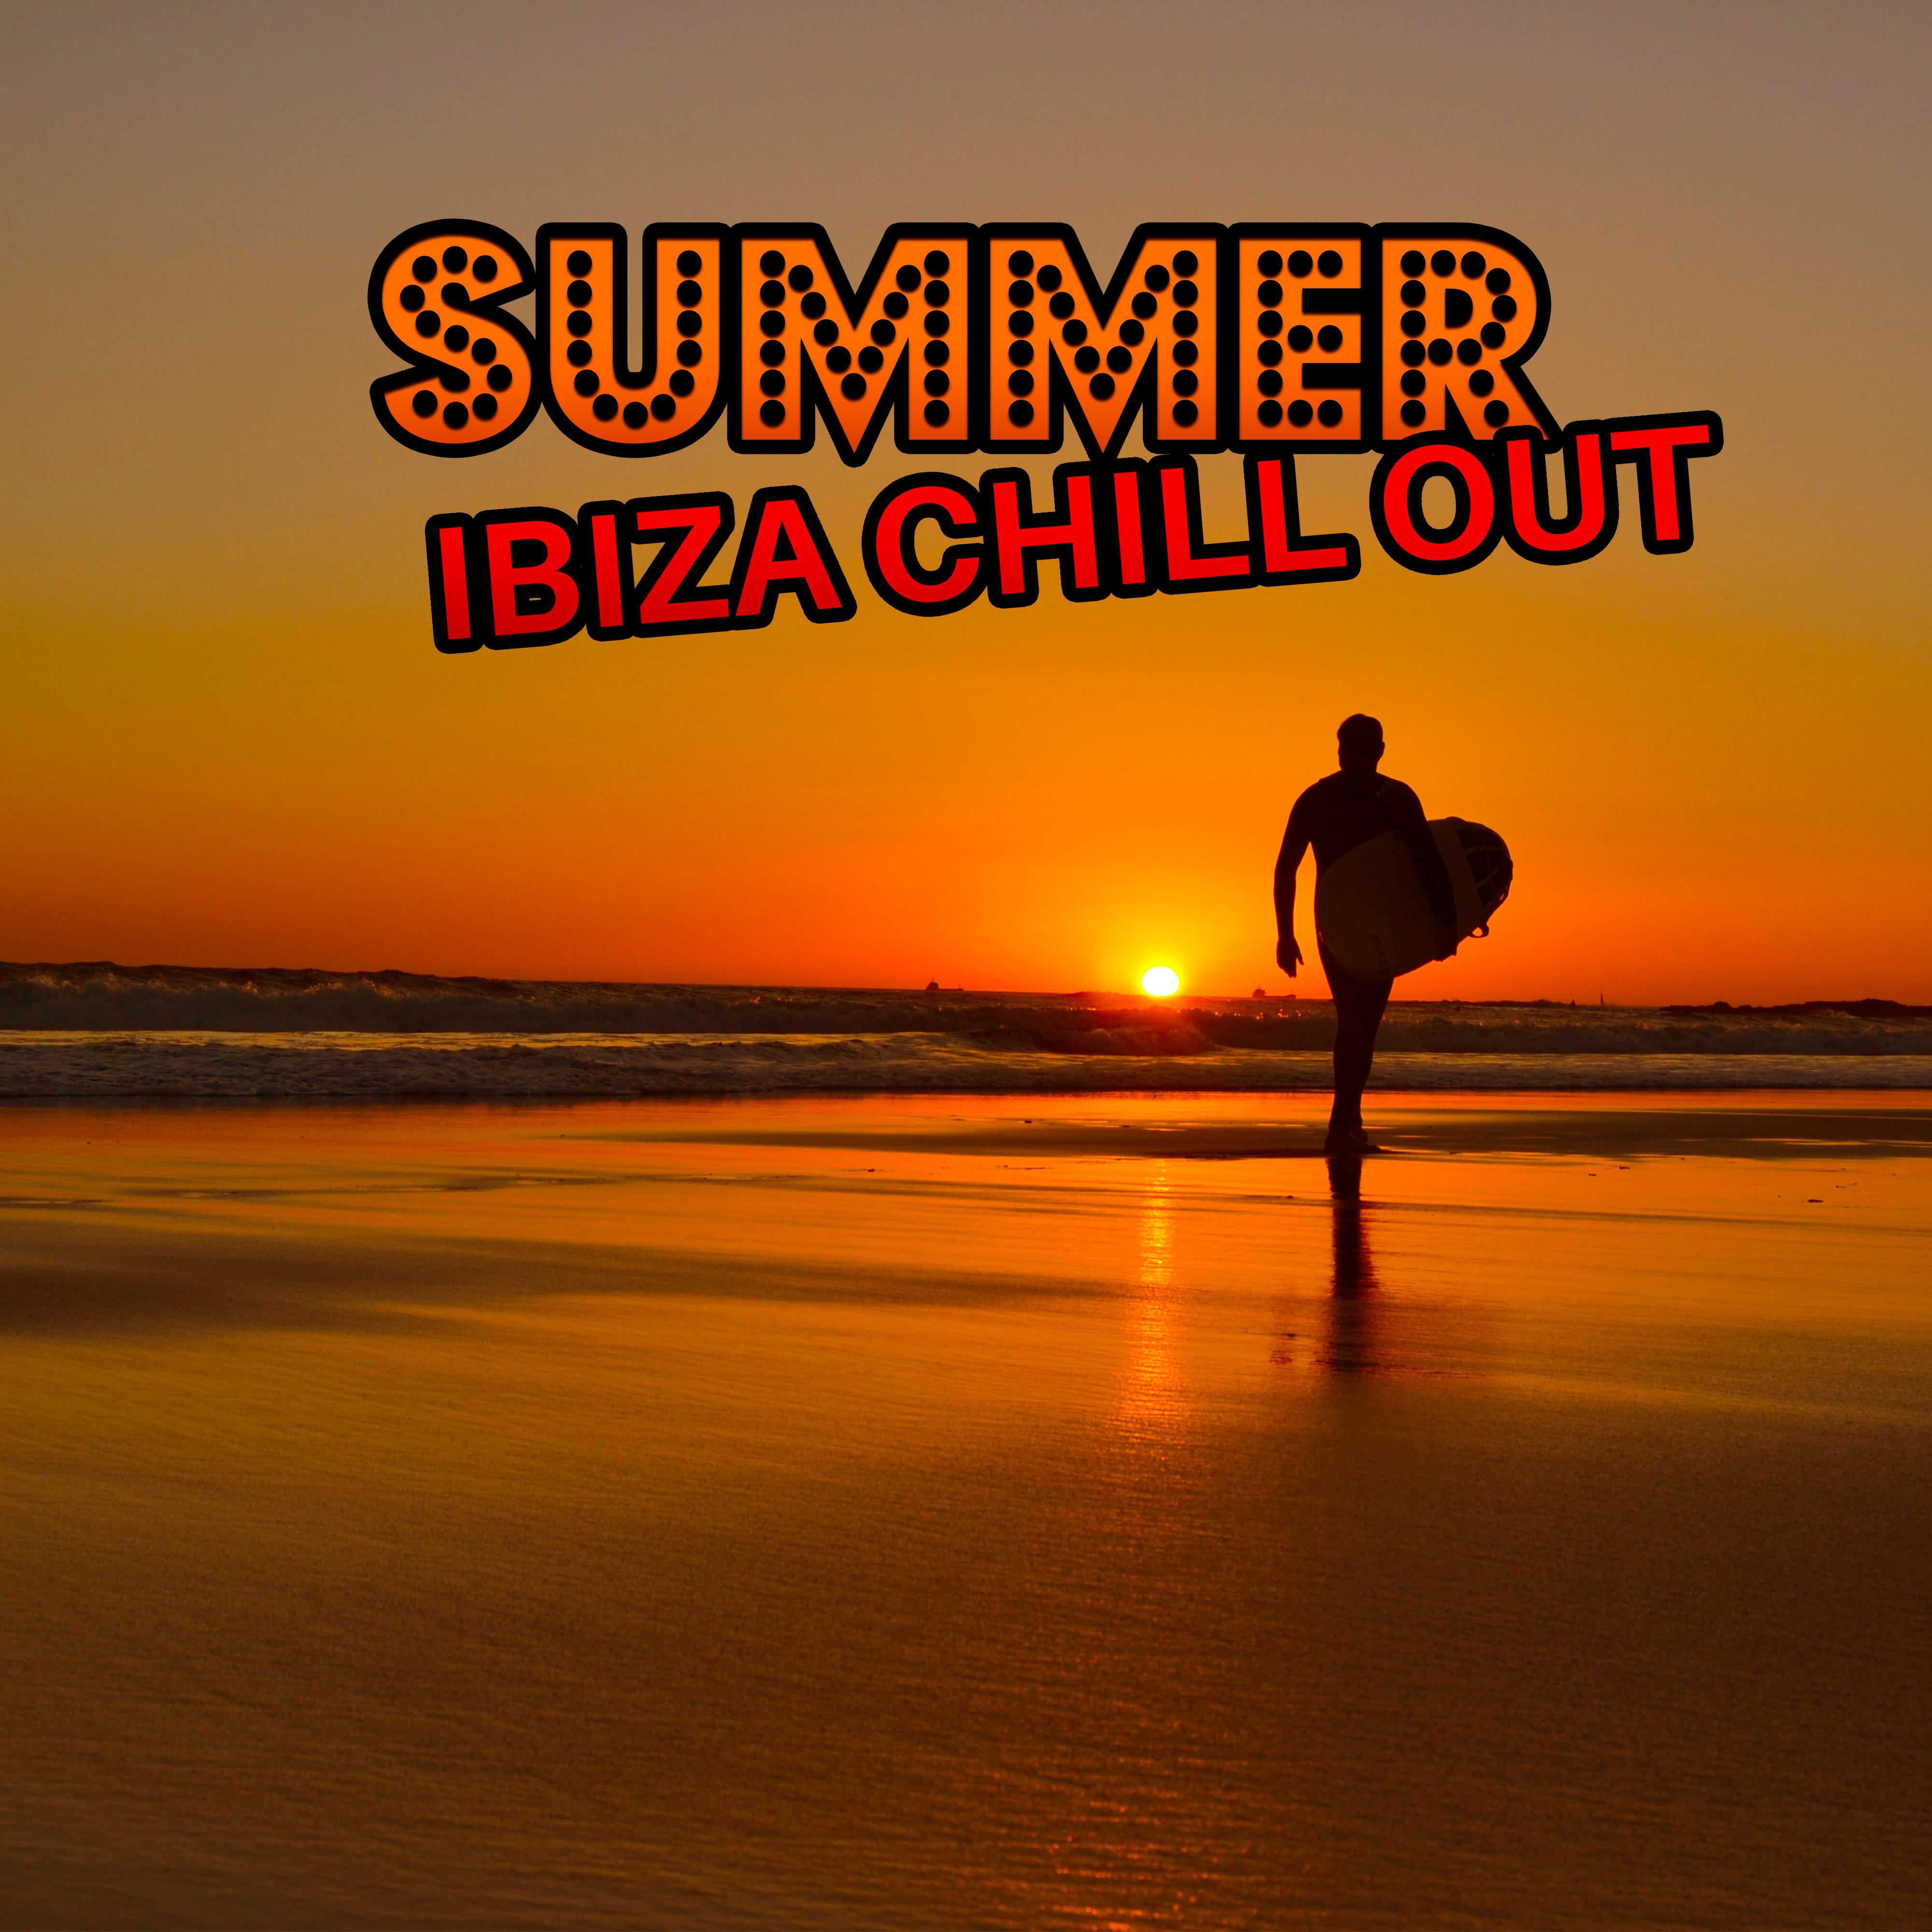 Summer Ibiza Chill Out – Rest on the Beach, Summer Sun & Sand, Easy Listening, Calm Down